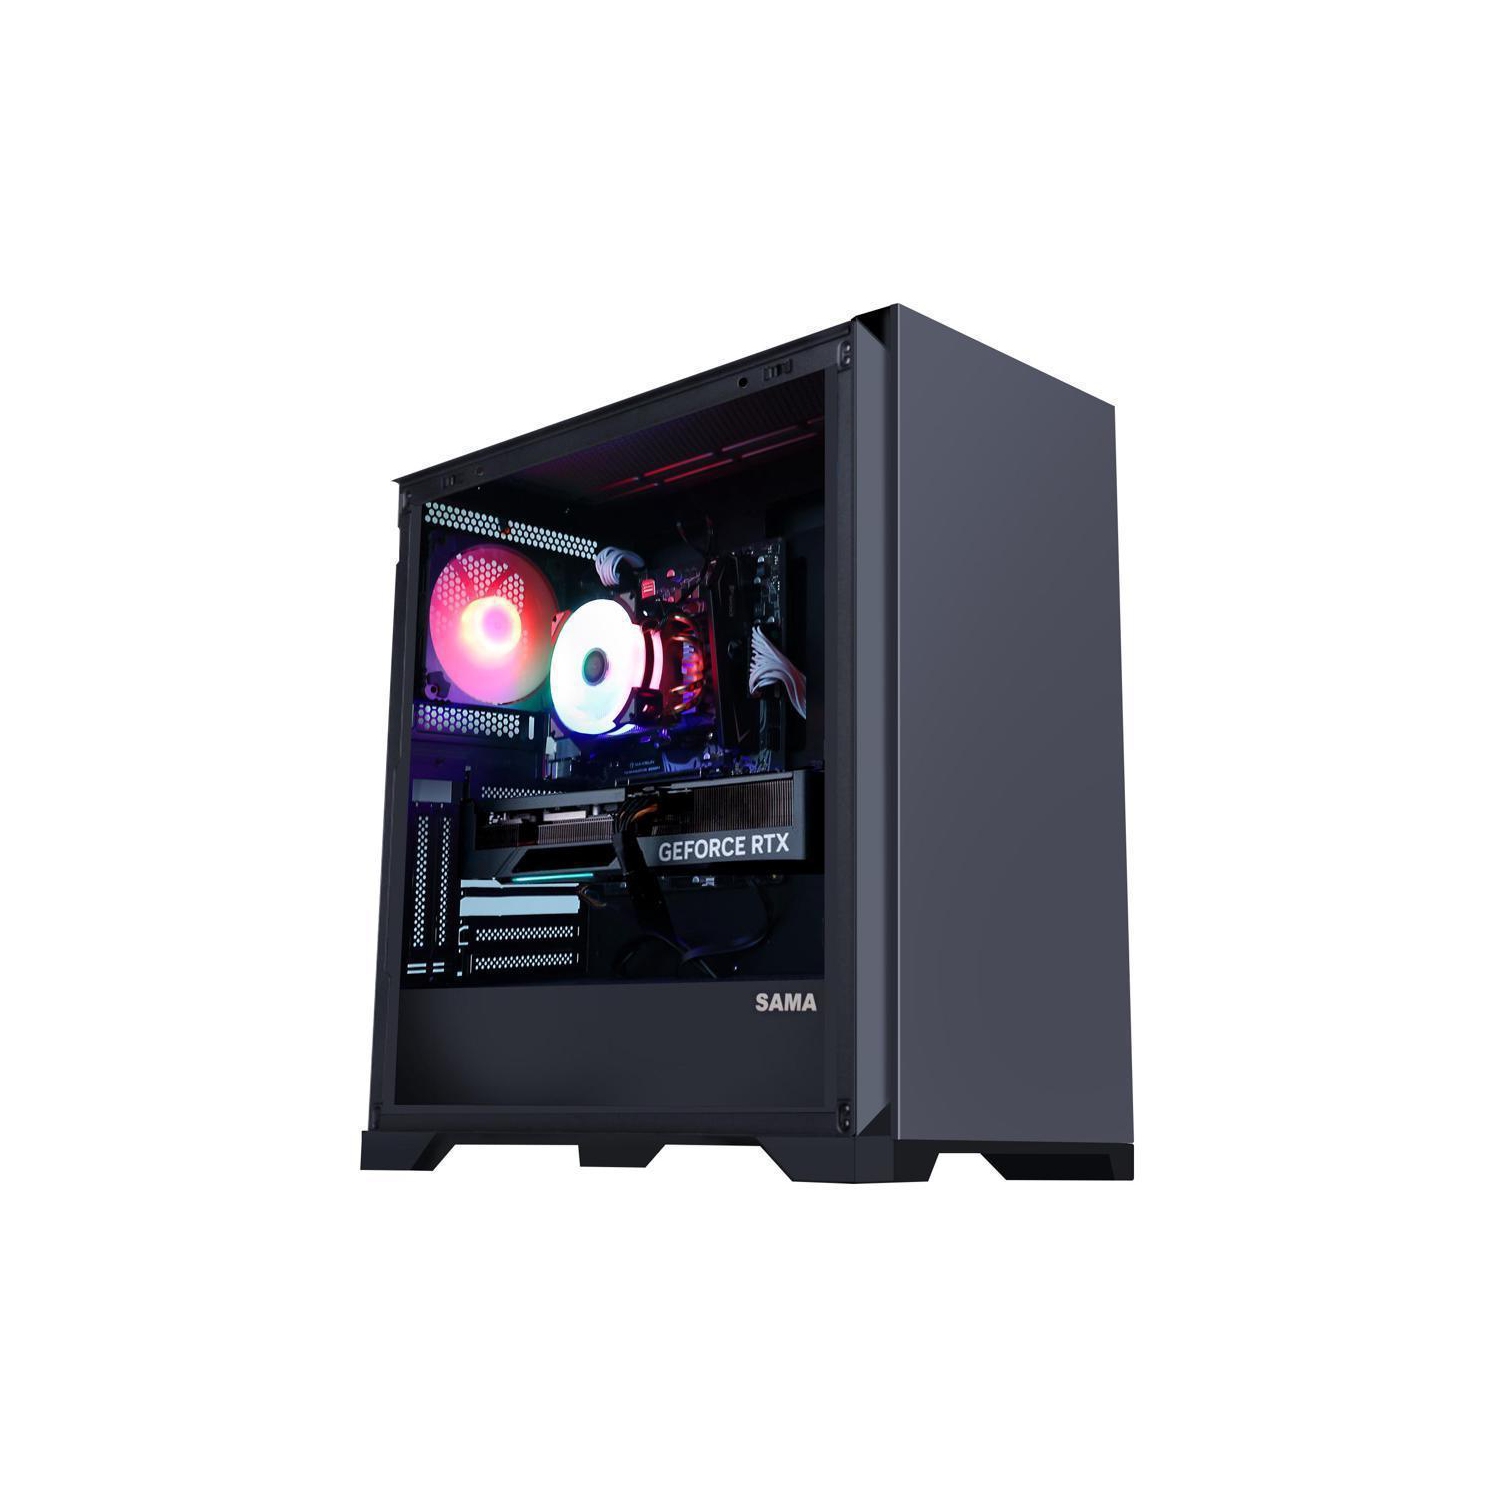 Hoengager Ares Gaming - Intel Core i5-12600K 10-Core 3.7GHz- RX 6750 XT 12G - 16GB DDR4 3200MHz - 500GB M.2 + 1TB 2.5'' SATA SSD- WIFI -RGB Fans - Windows 11 Pro Computer